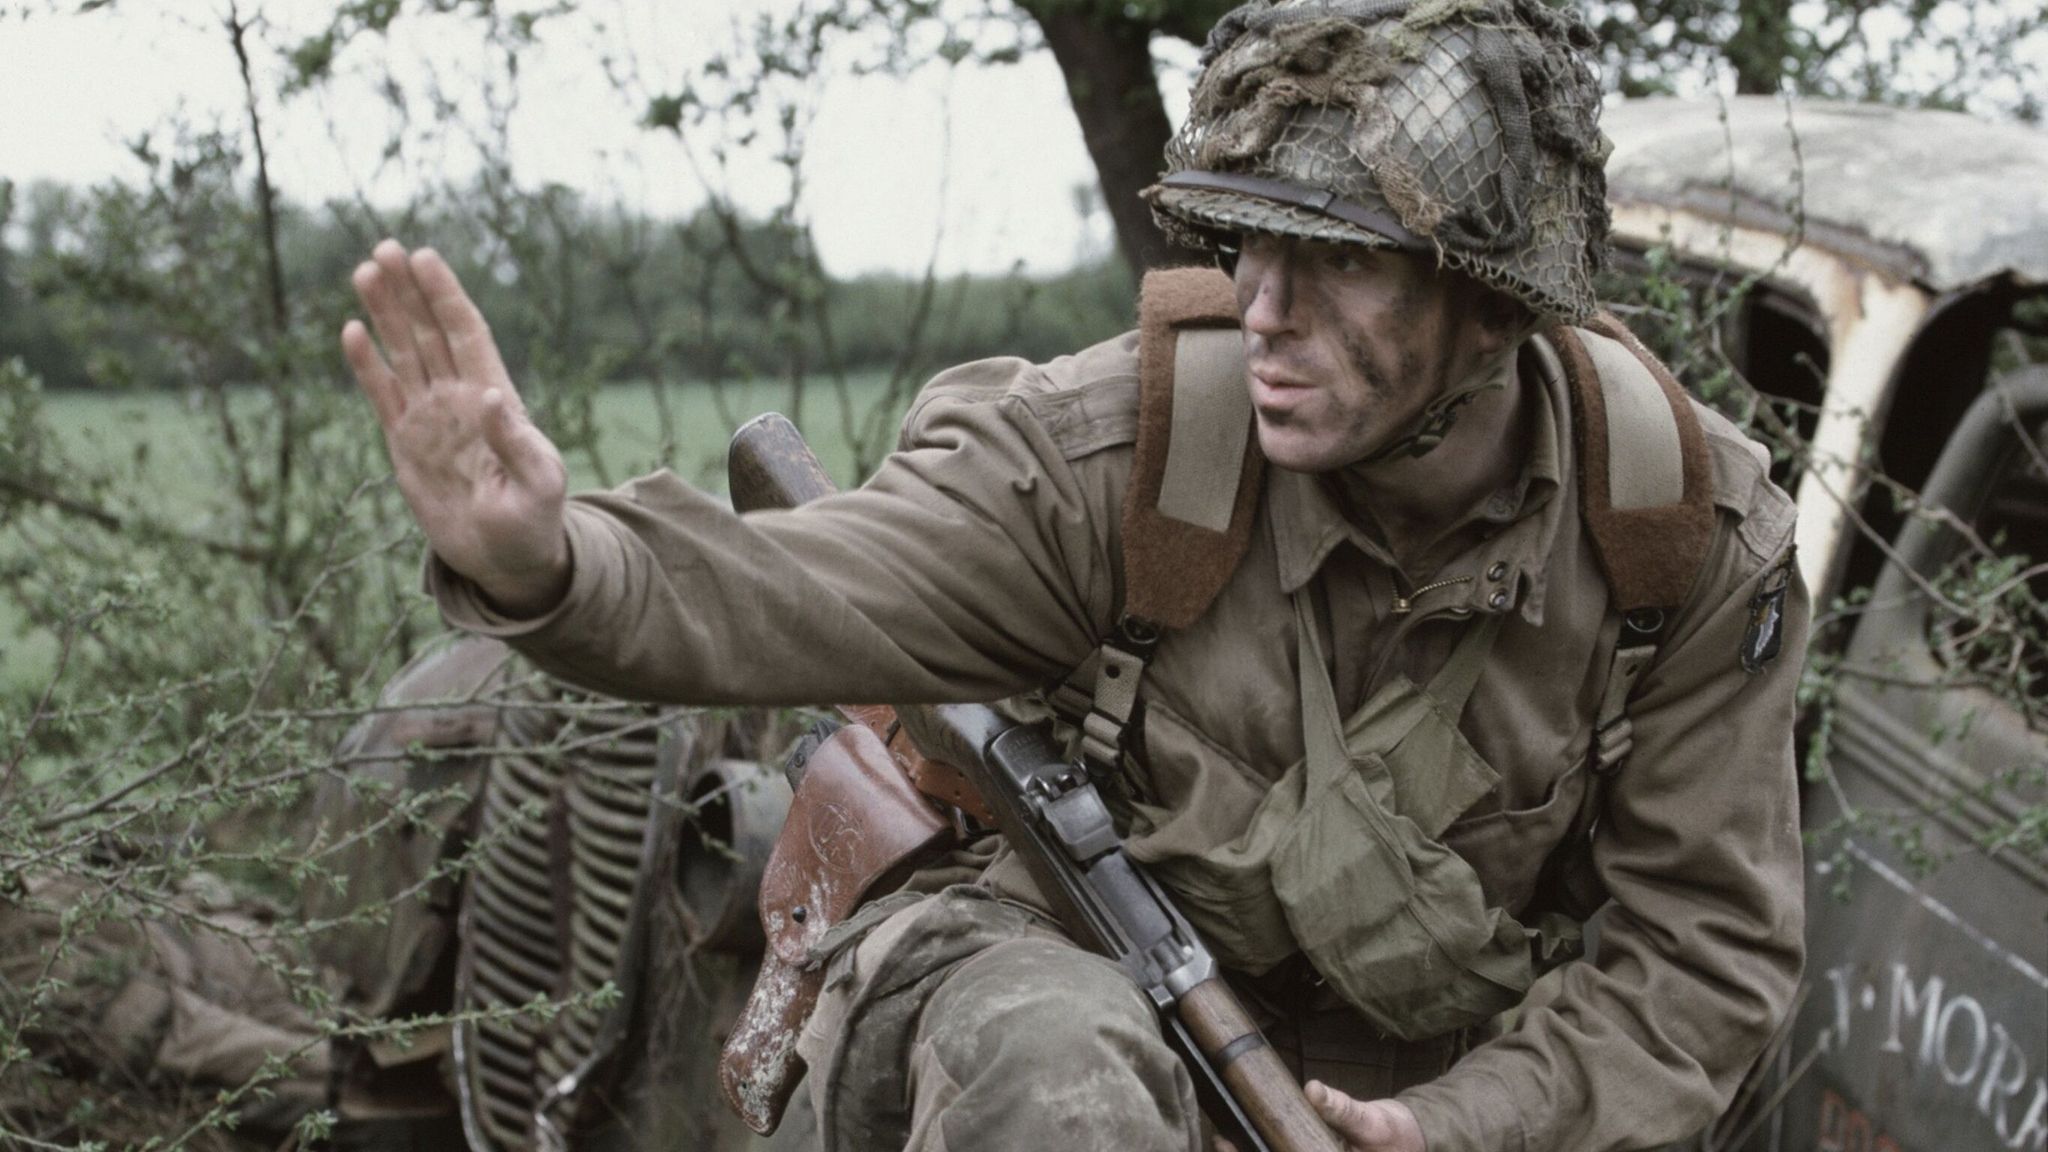 Pic: David James/Hbo/20th Century Fox/Dream Works/Kobal/Shutterstock Editorial use only. No book cover usage. Mandatory Credit: Photo by David James/Hbo/20th Century Fox/Dream Works/Kobal/Shutterstock (5883529m) Damian Lewis Band Of Brothers - 2001 Hbo / 20th Century Fox / Dream Works USA Television